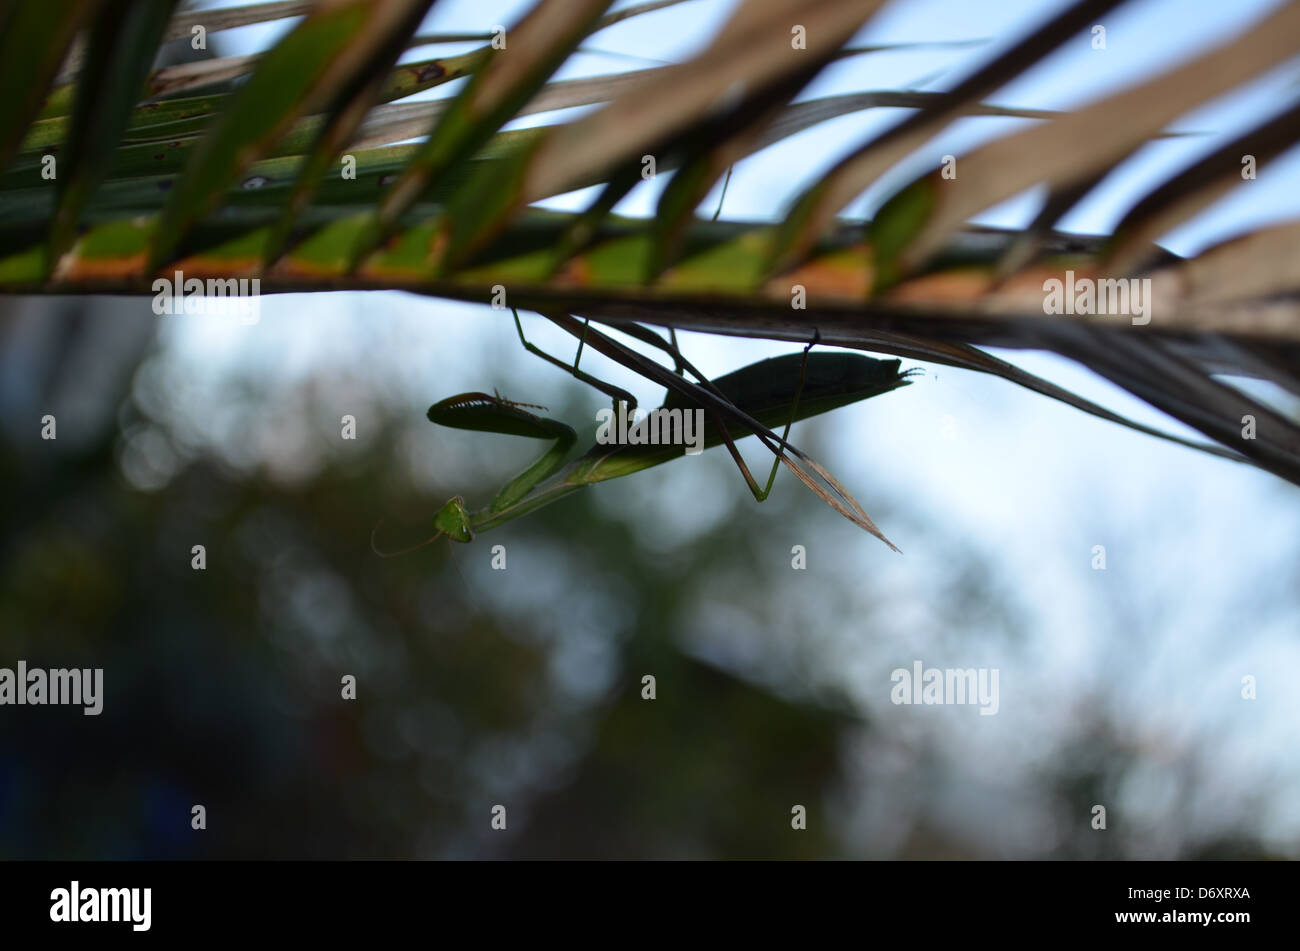 Here were one mantises nun on a sheet(leaf) of palm tree. Stock Photo